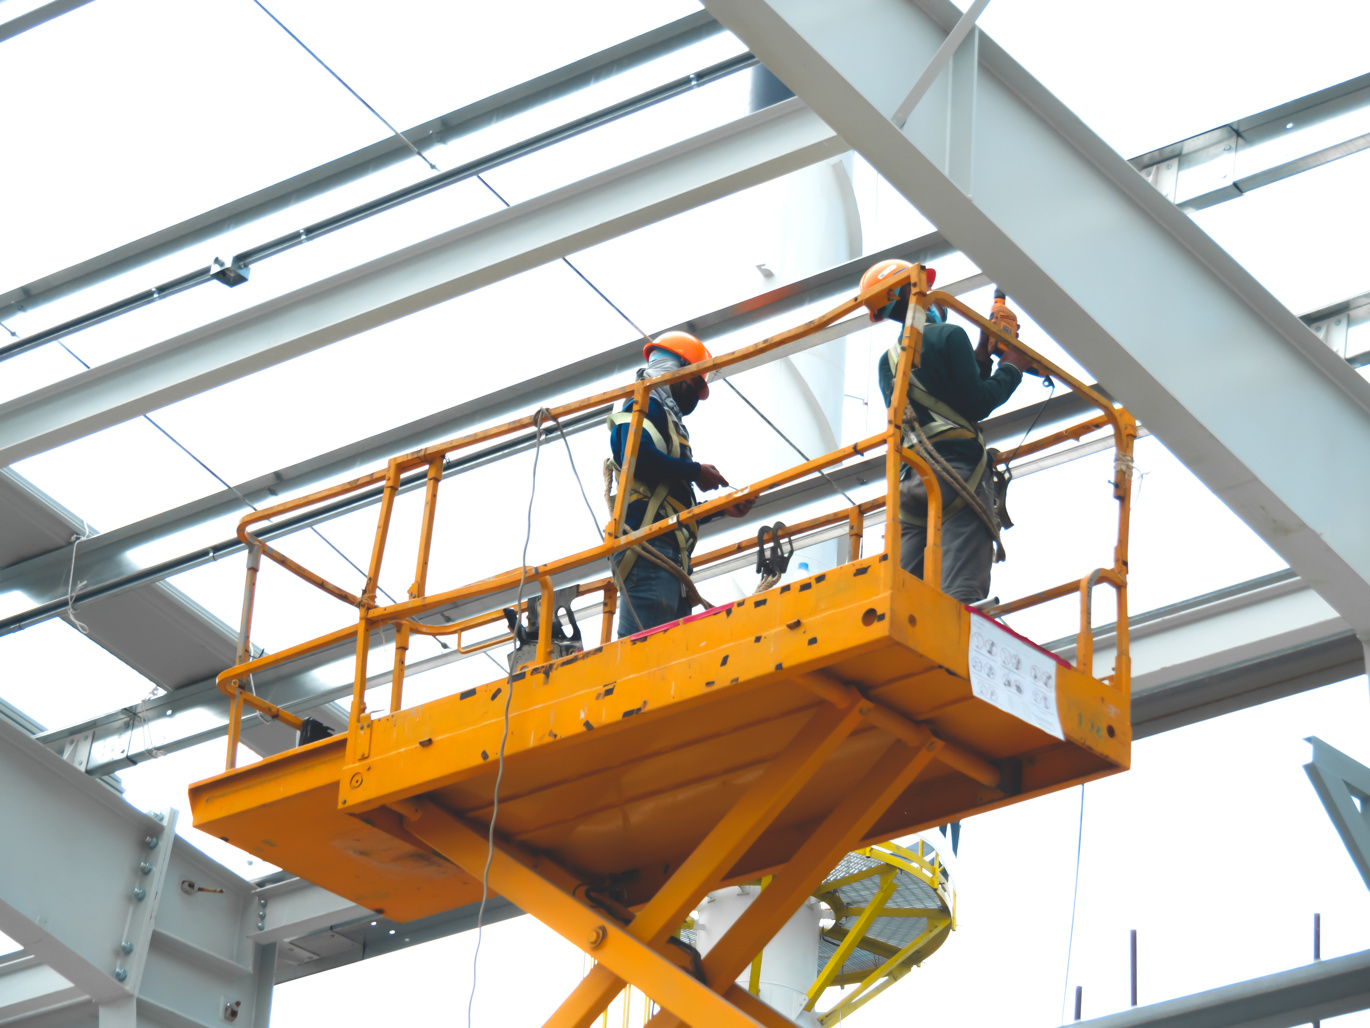 Indoors orange hydraulic lift with two workers high up wearing protective harnesses and orange hard hats.